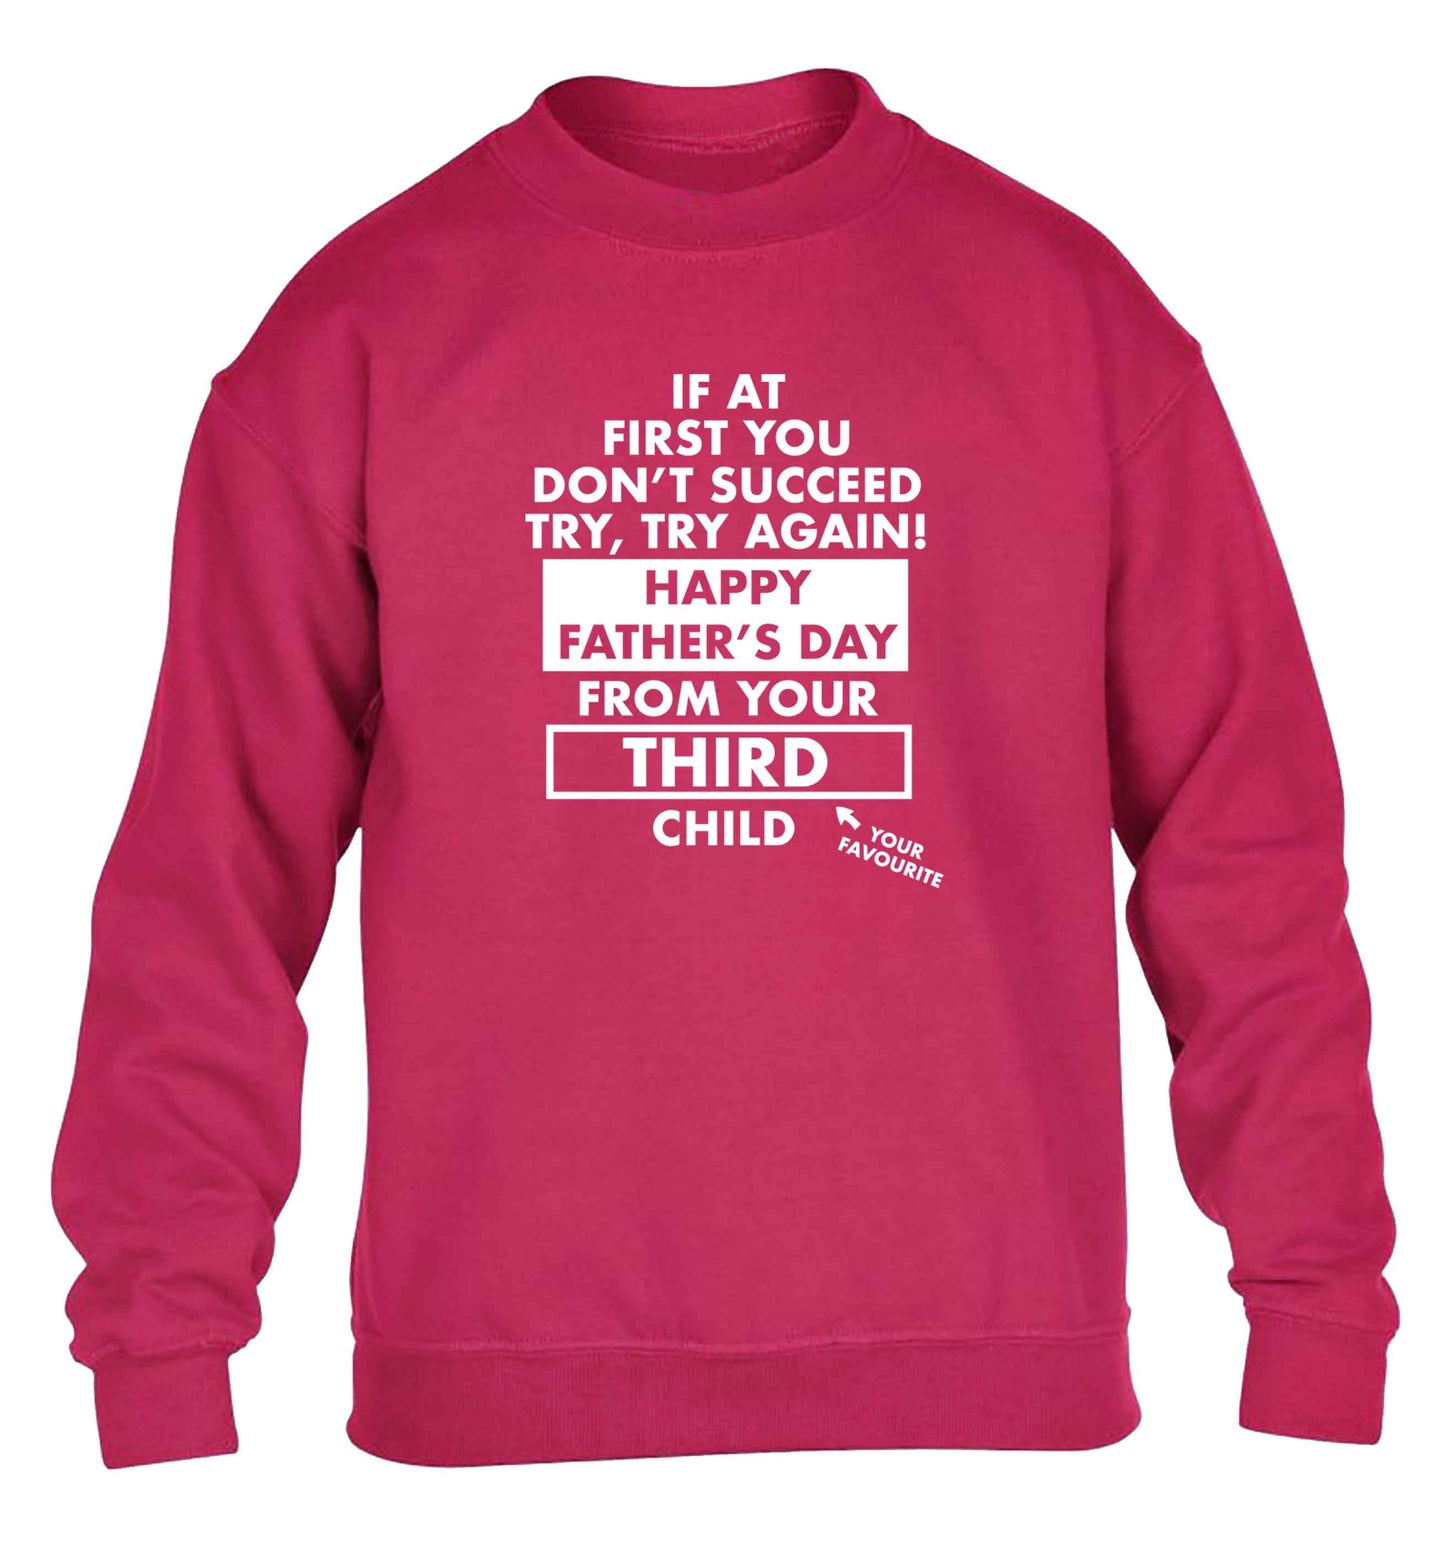 If at first you don't succeed try, try again Happy Father's day from your third child! children's pink sweater 12-13 Years